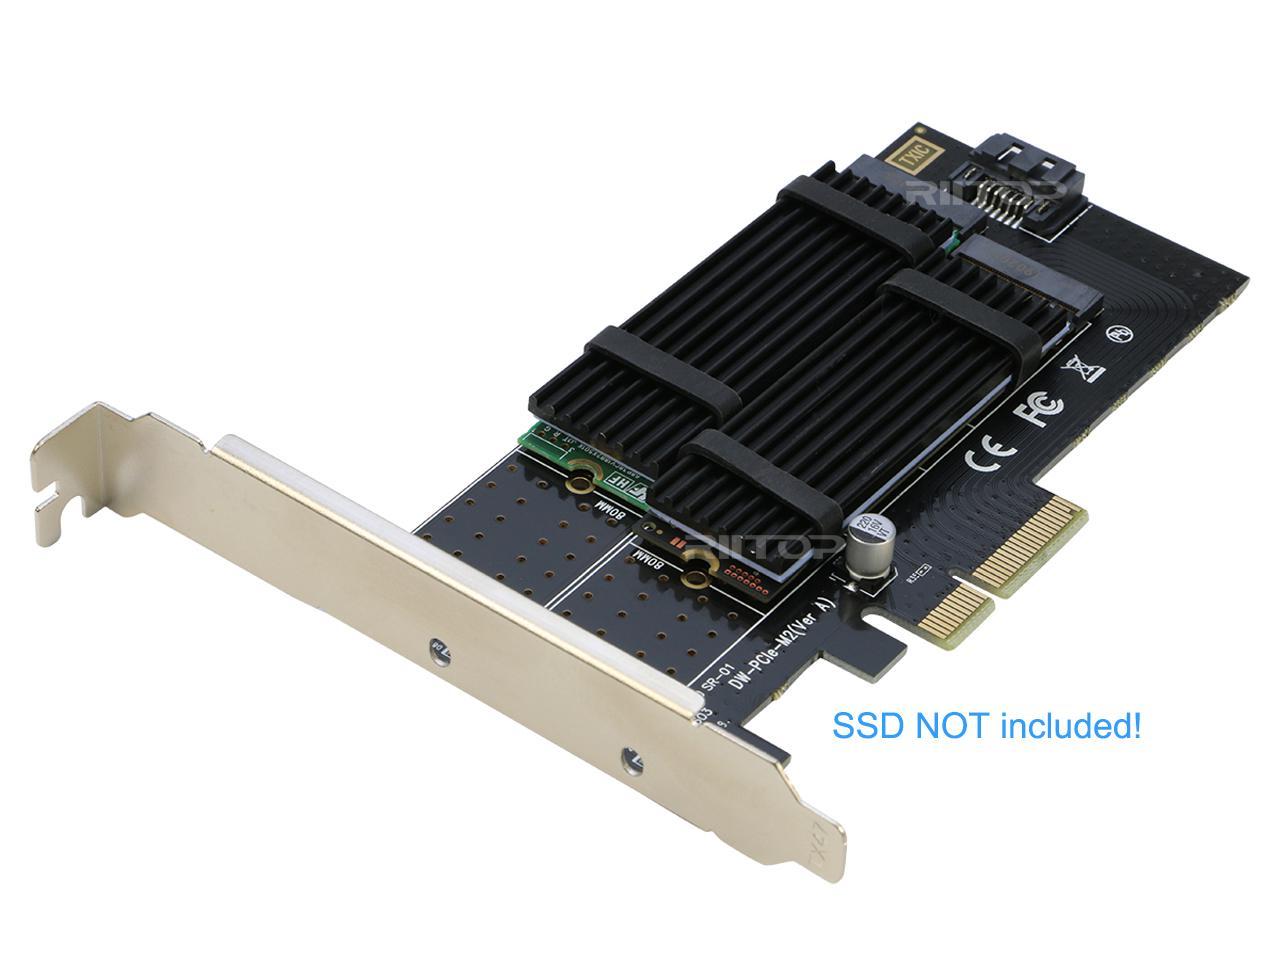 Dual M.2 PCIe 4x Adapter for SATA or PCIe NVMe SSD with Heatsink